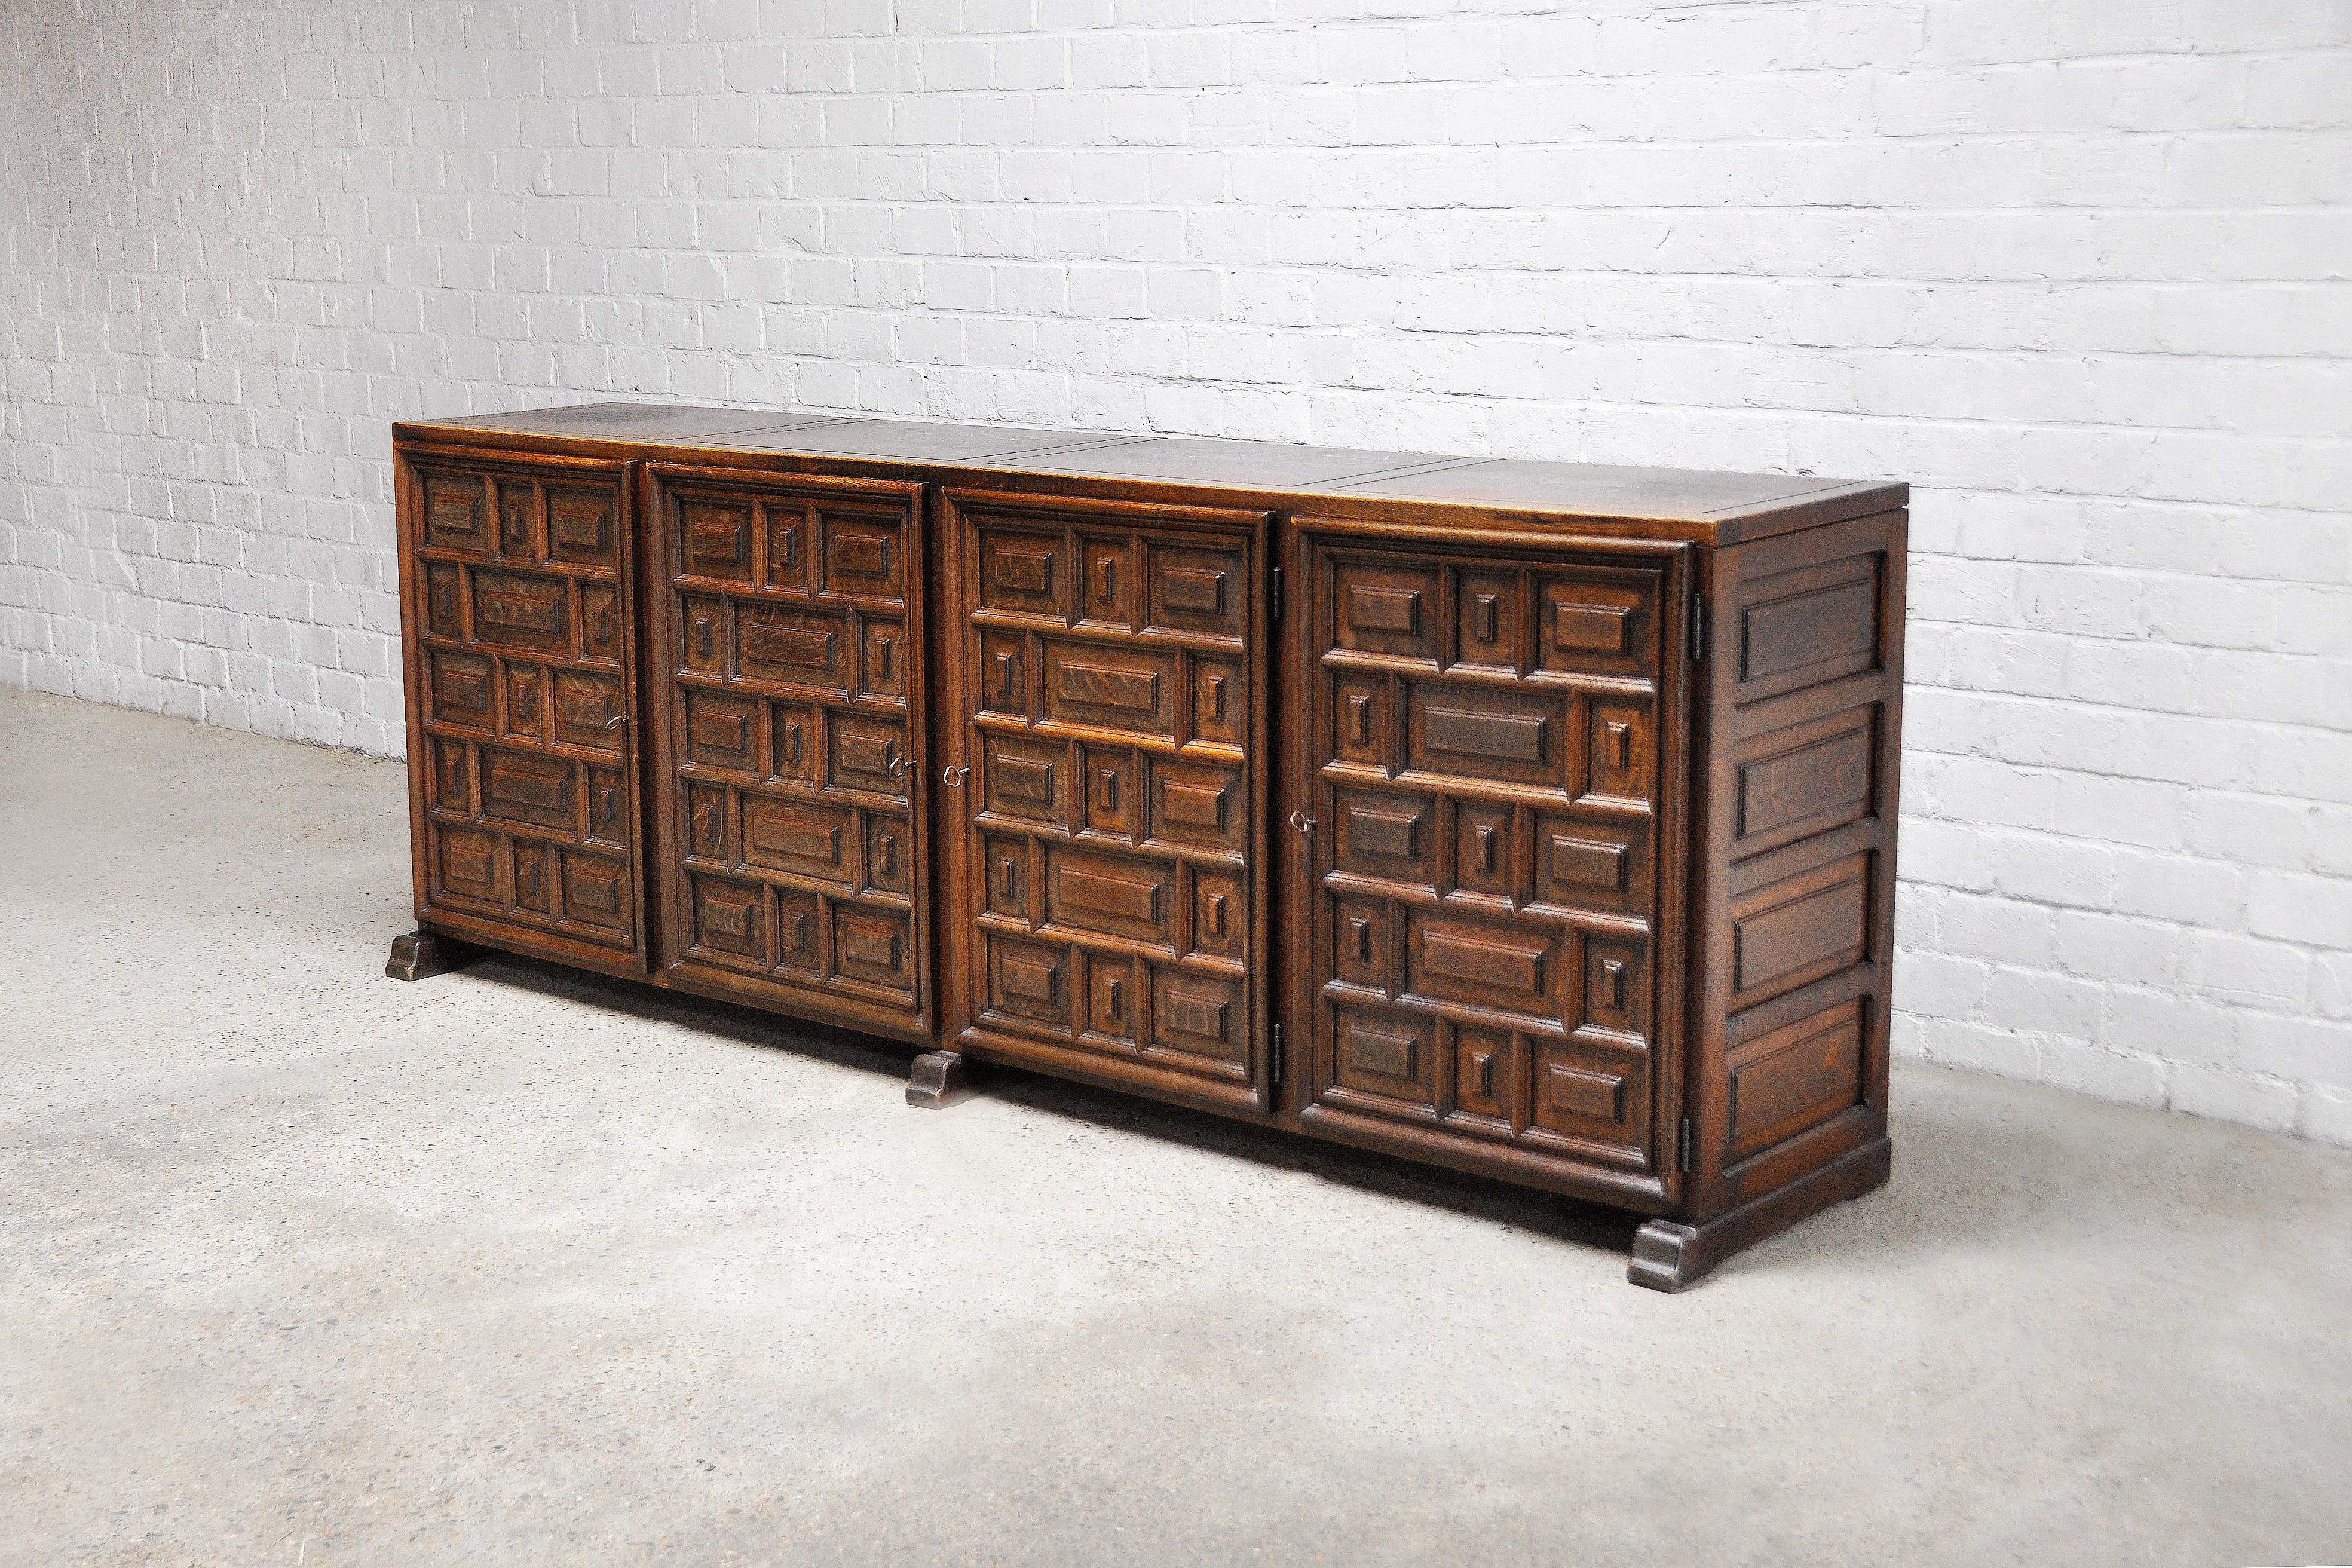 Mid-20th Century Spanish Brutalist Sideboard With Geometric Patterns, 1940s